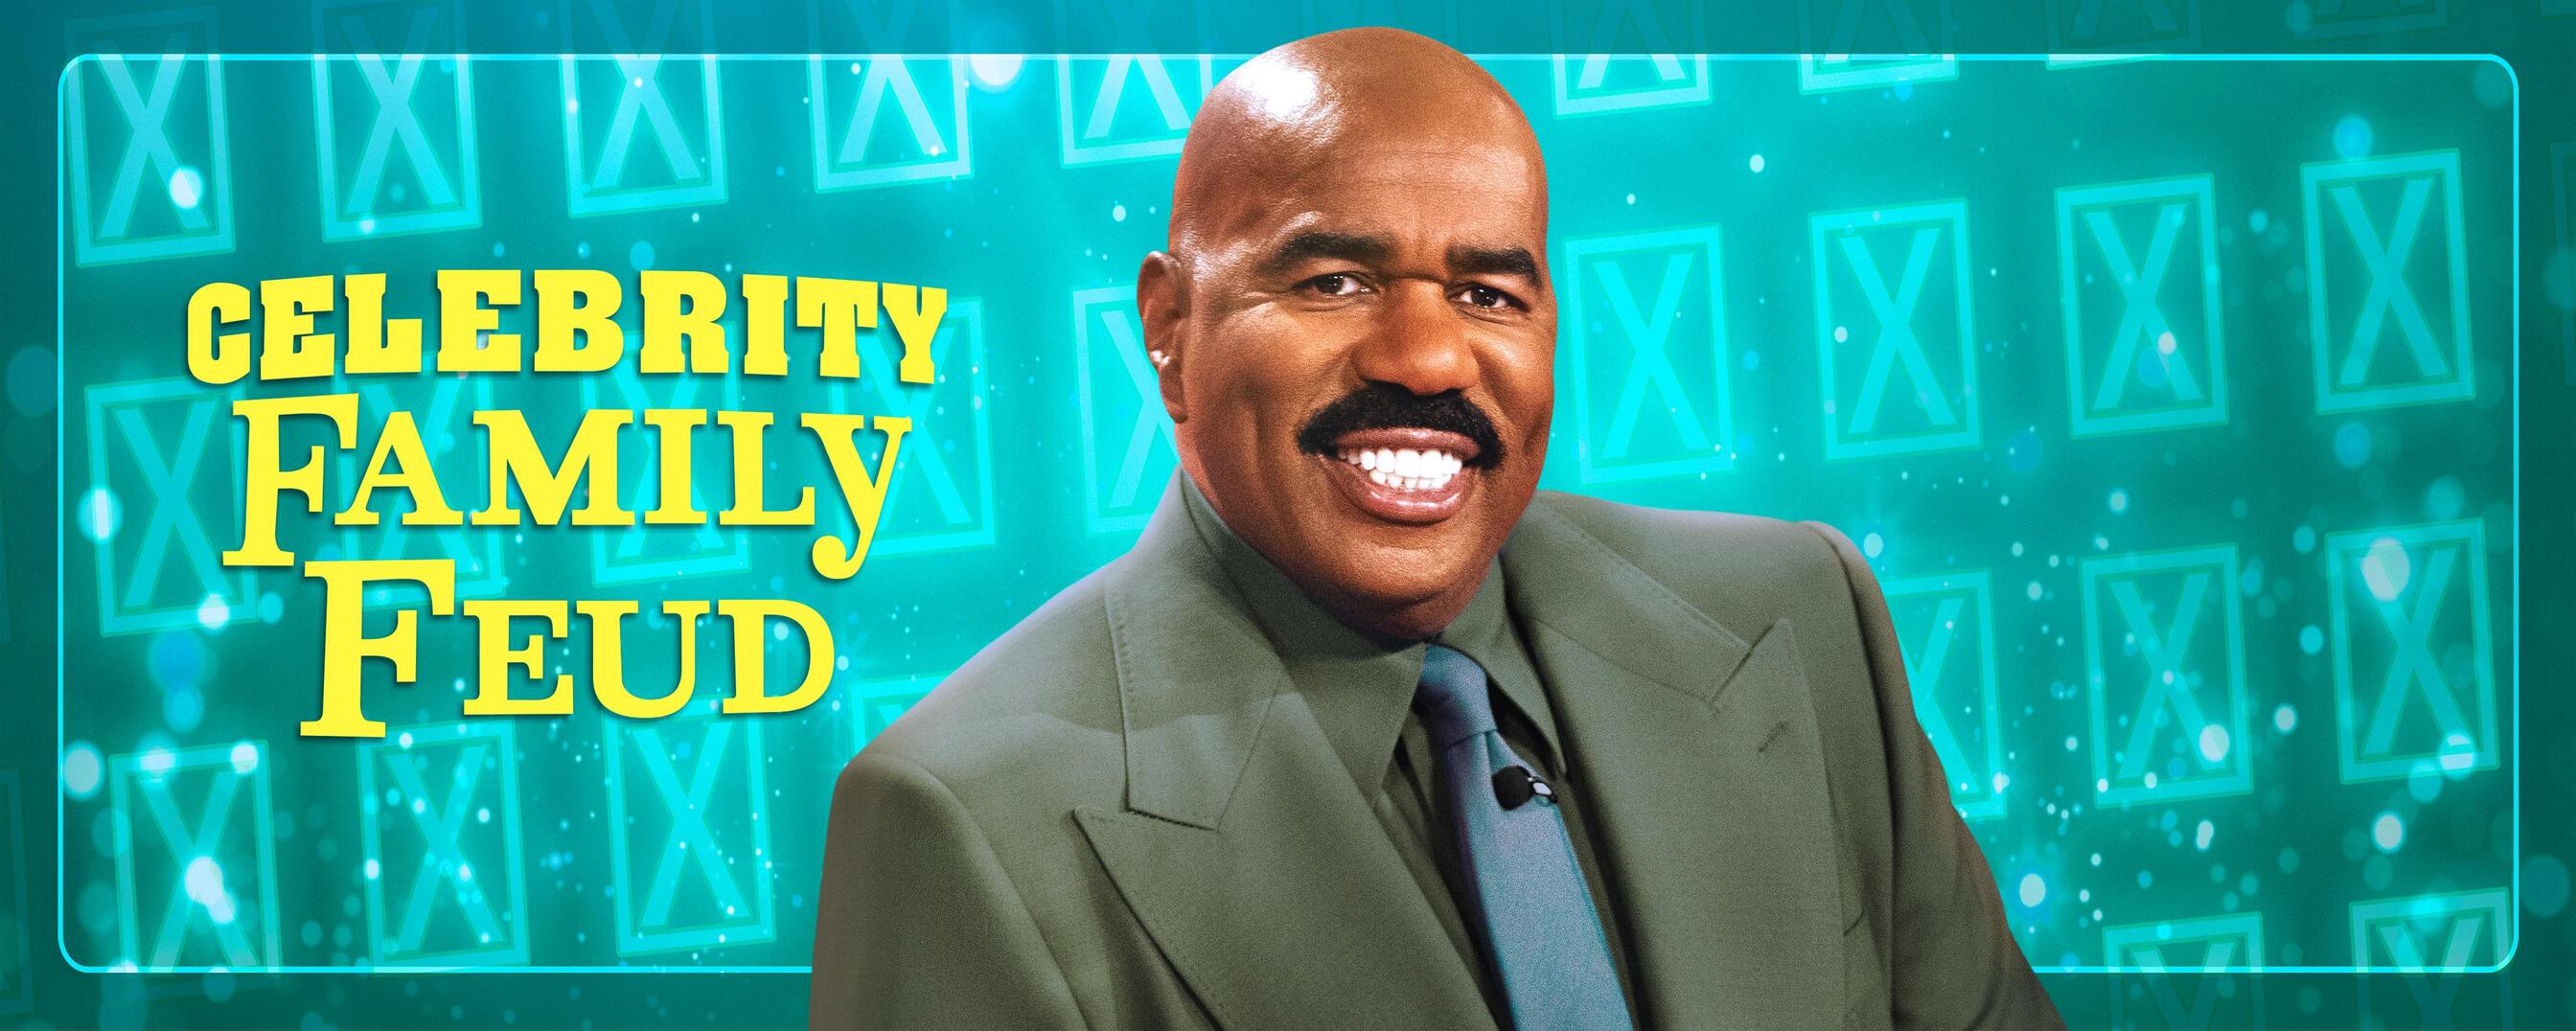 family feud full episodes watch online